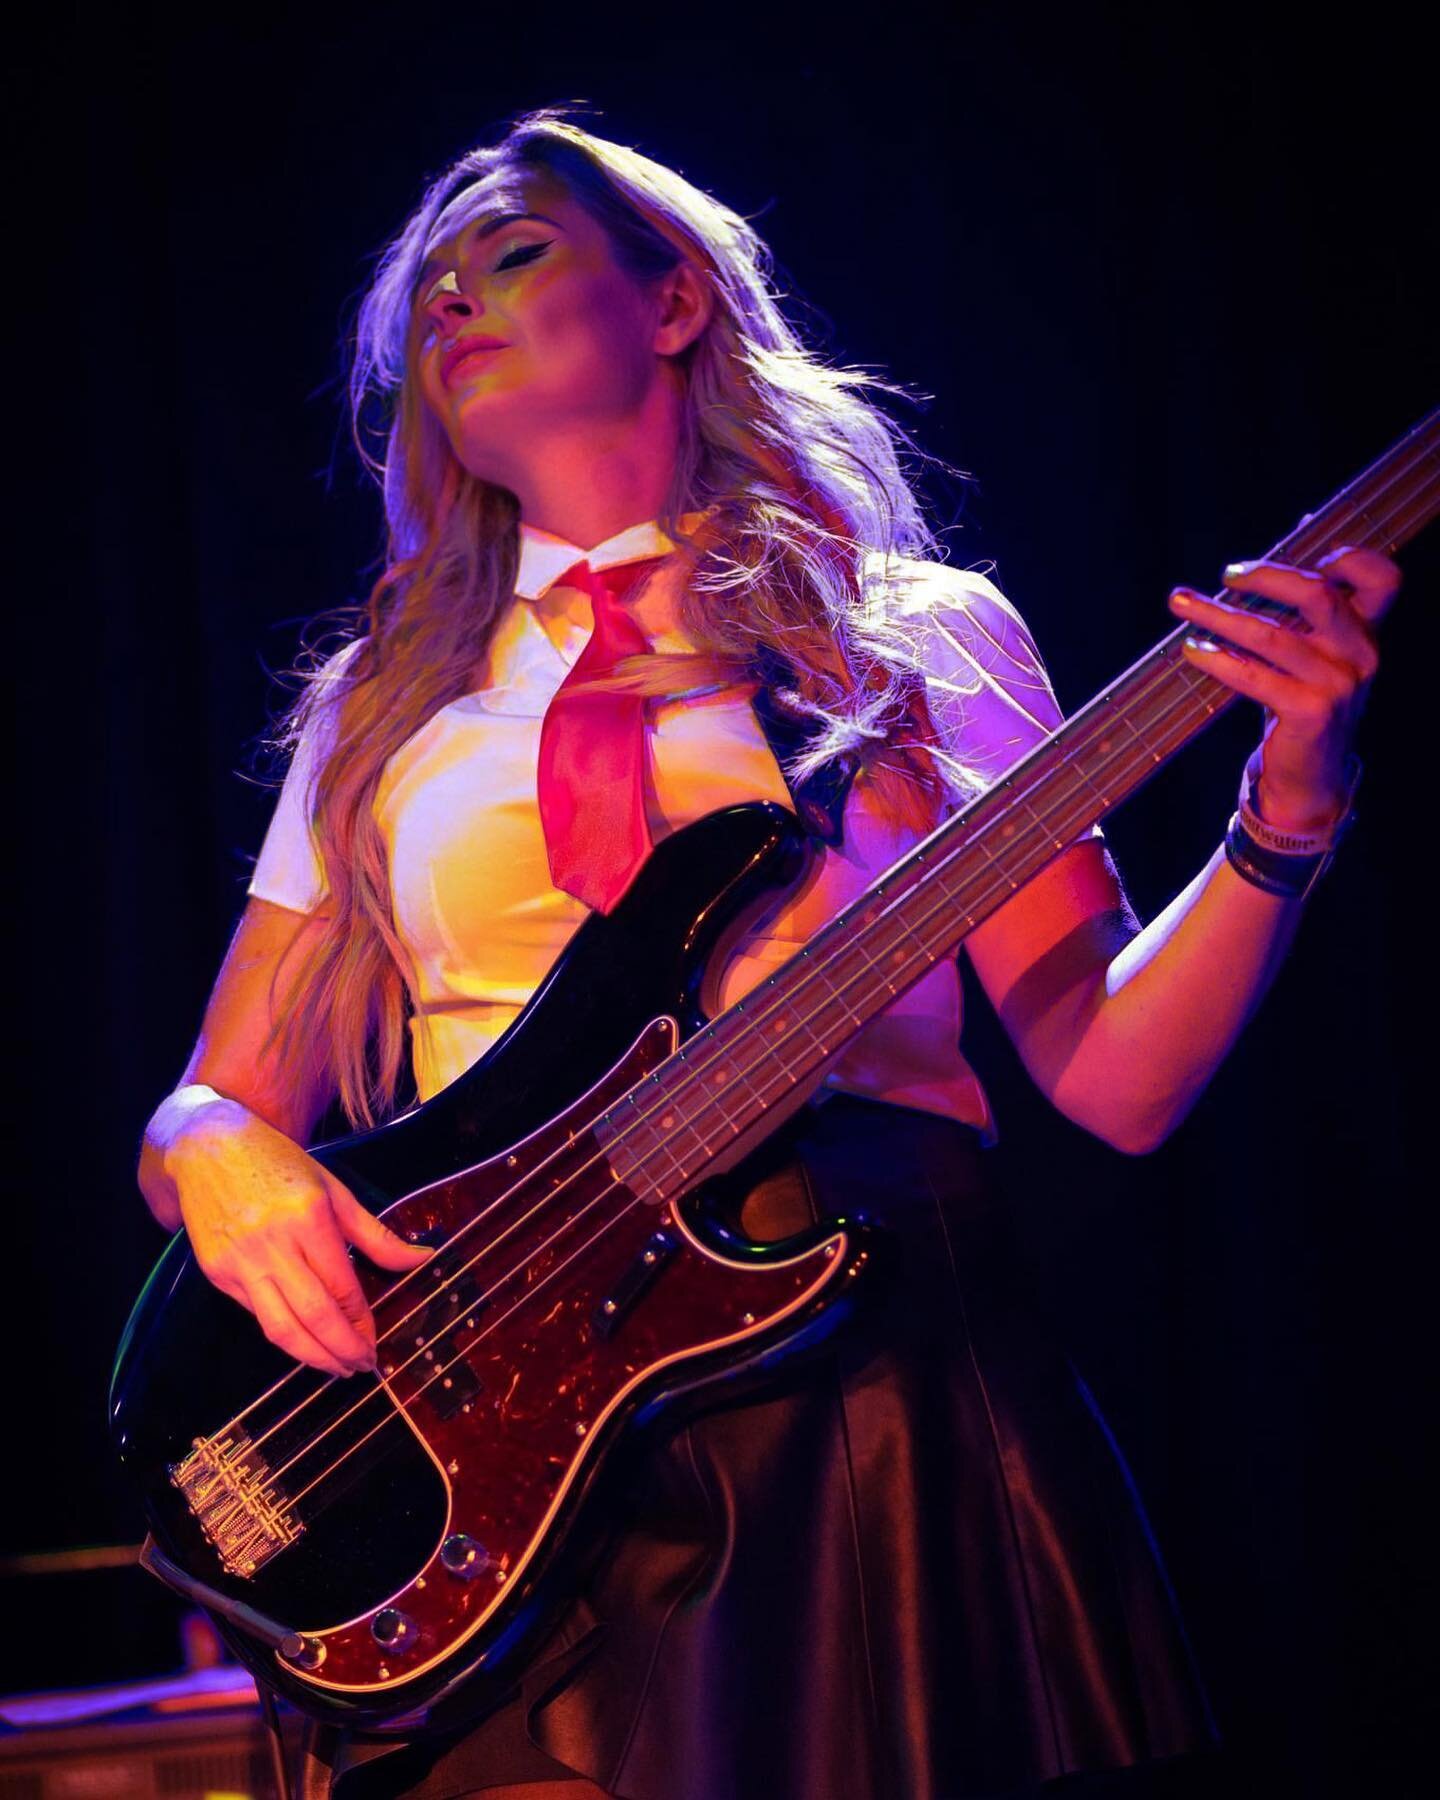 Lost in the music #nobetterfeeling 

Rocking my new Fender American Vintage II 1960 P Bass - a beautiful descendant of the original.  @fender 

Photo by Bruce Forrester @warmlightphotography